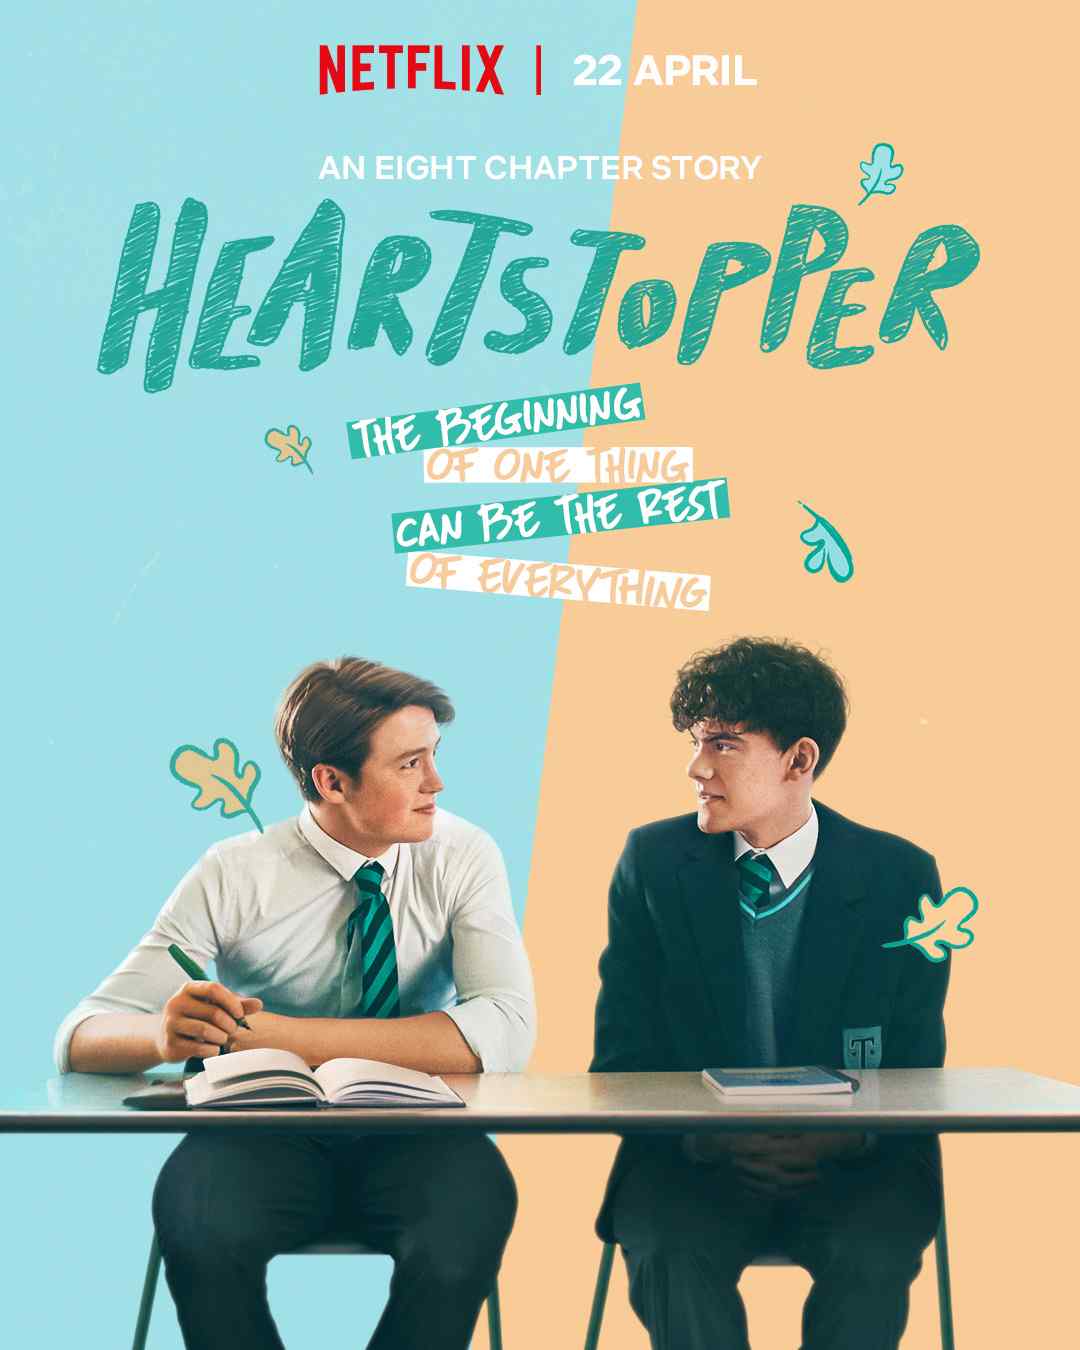 A graphic novel by Alice Oseman inspired the British romantic drama series Heartstopper.